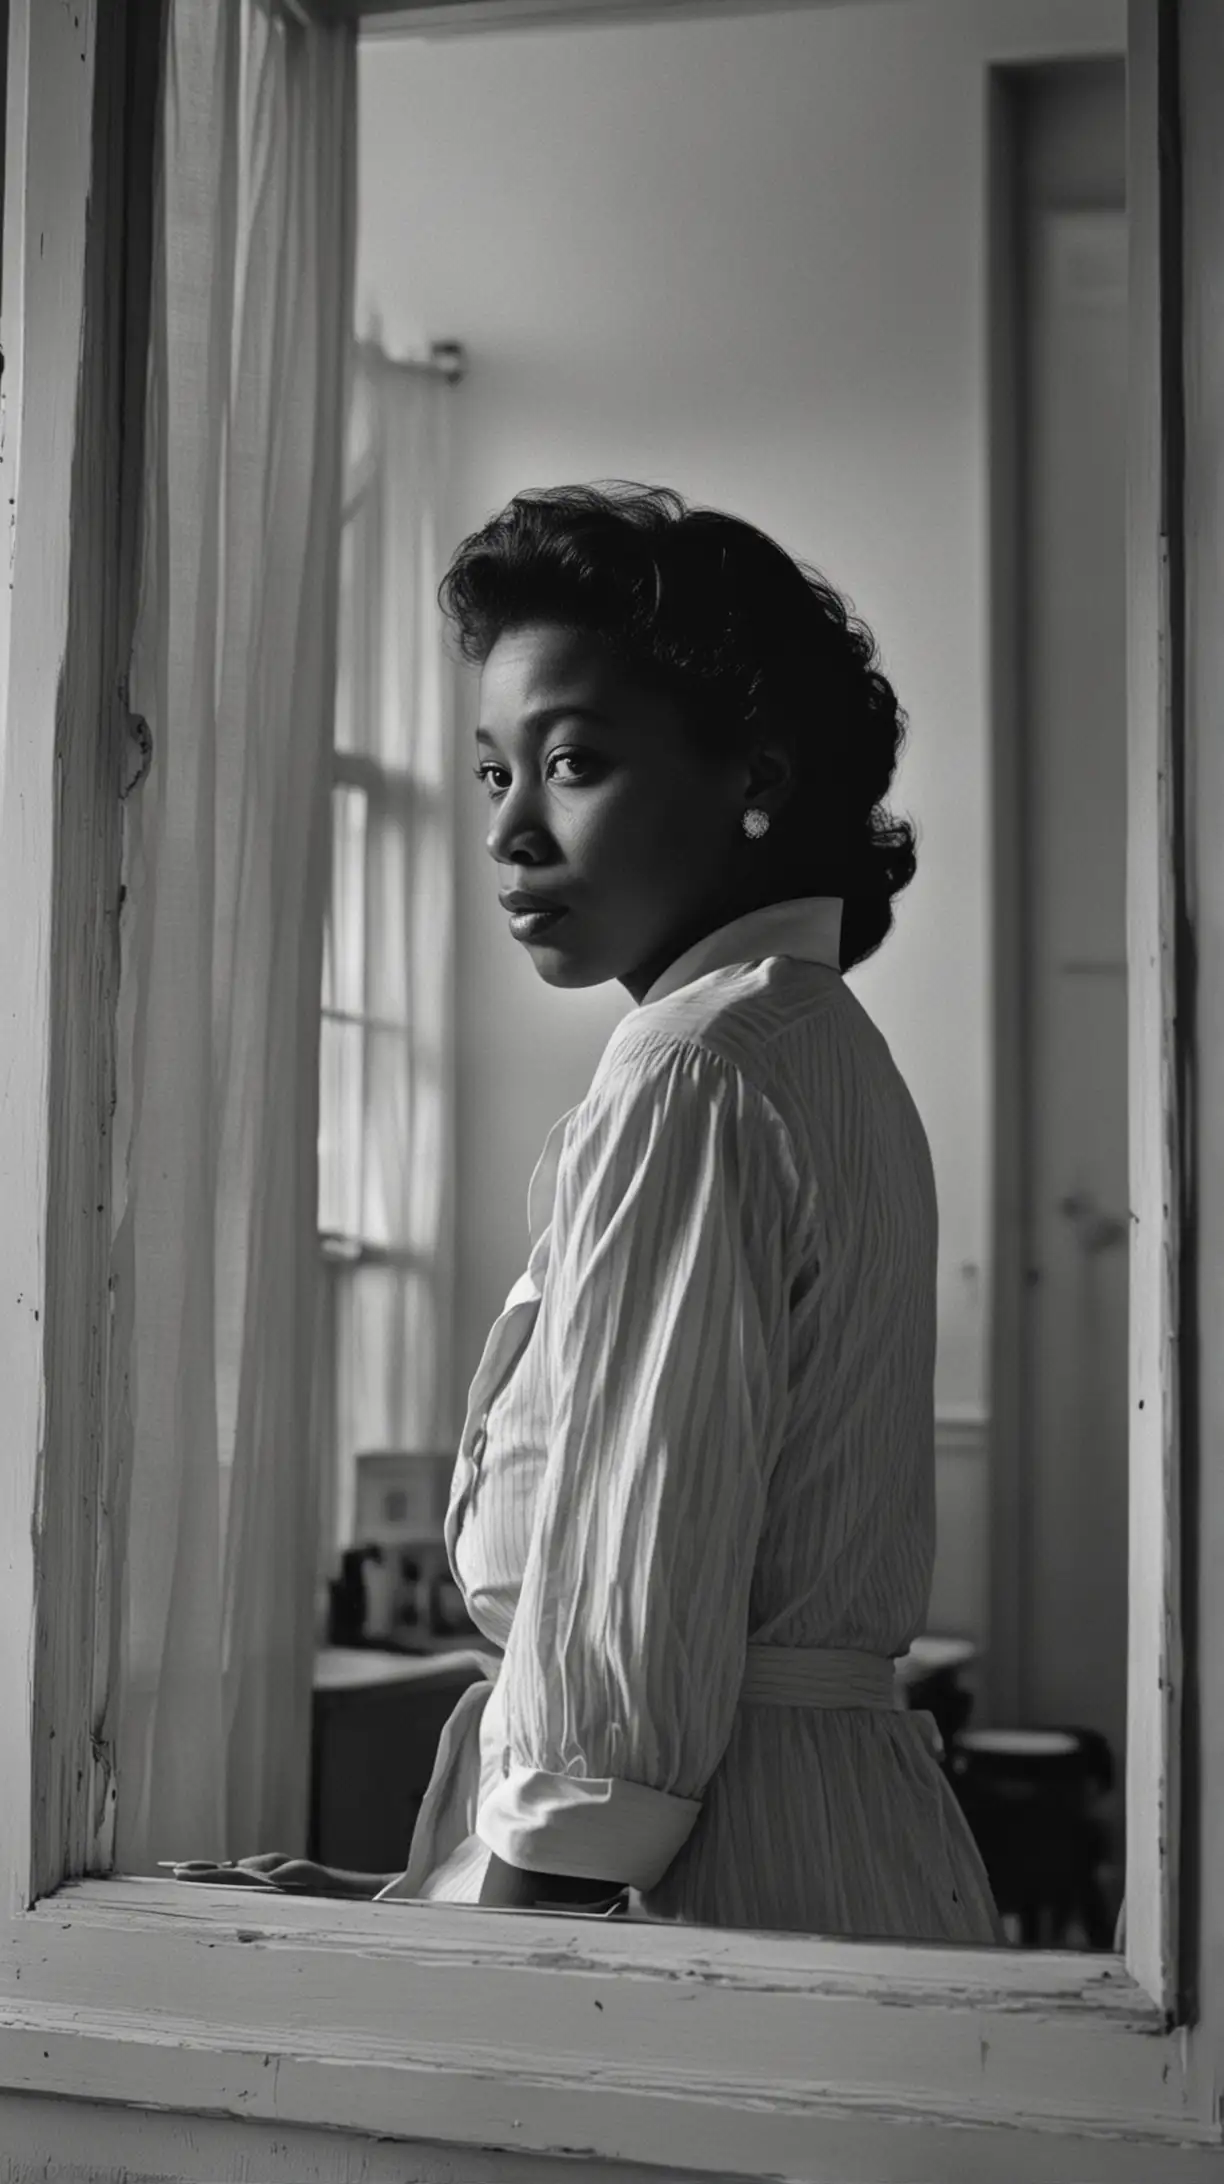 Gordon Parks Celebrating AfricanAmerican Culture Through Photography